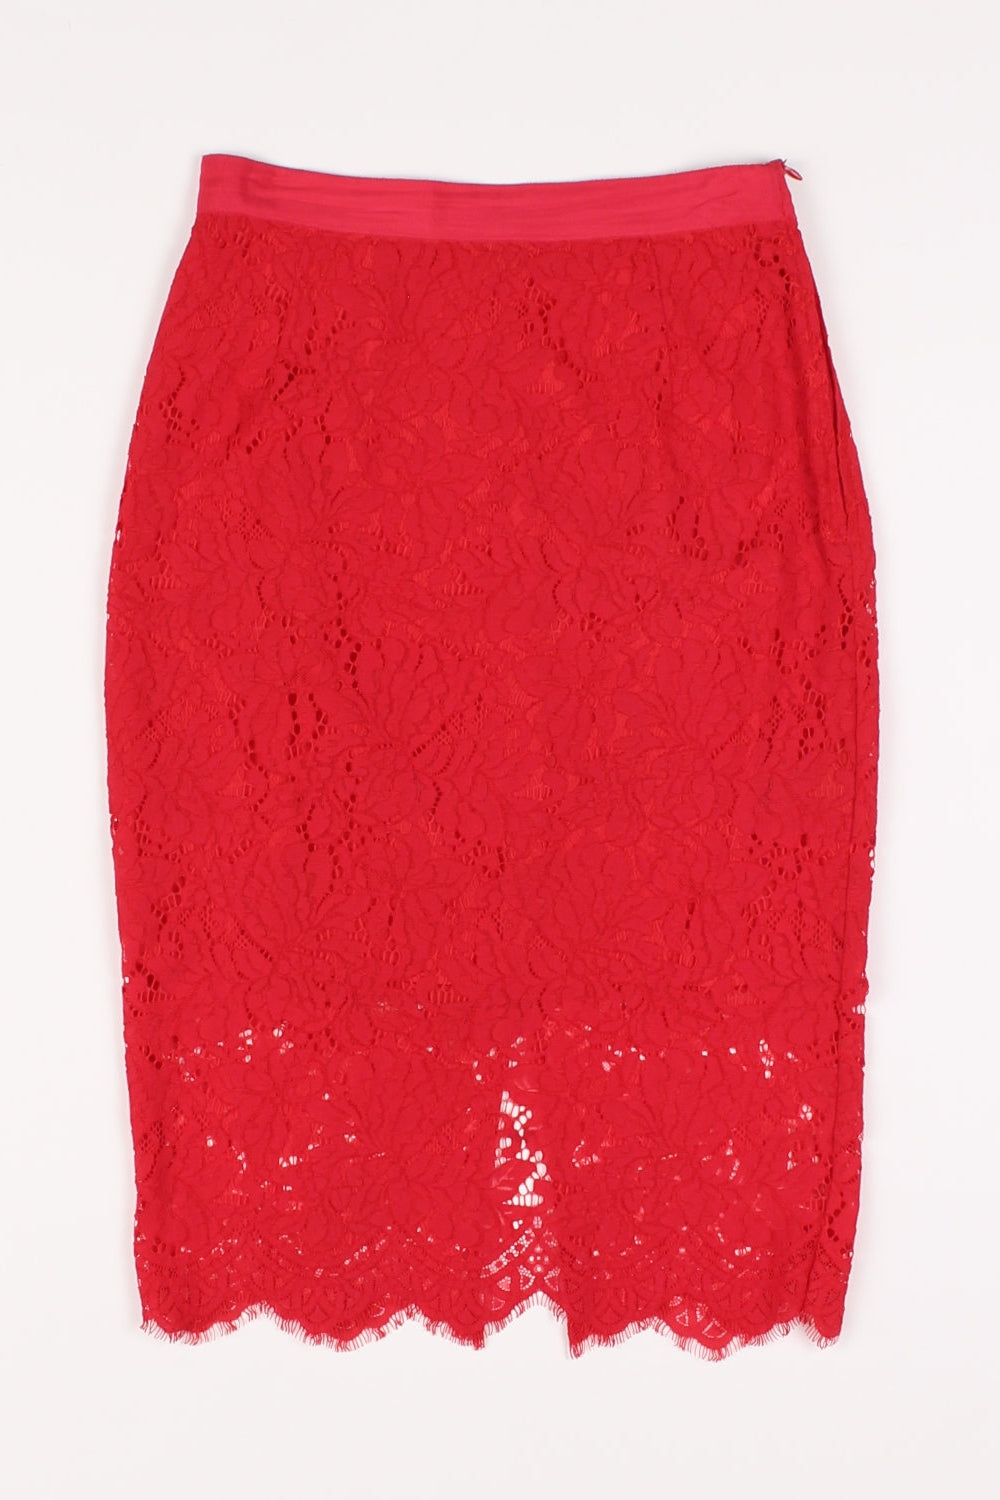 H&amp;M Red Lace Midi Skirt 8